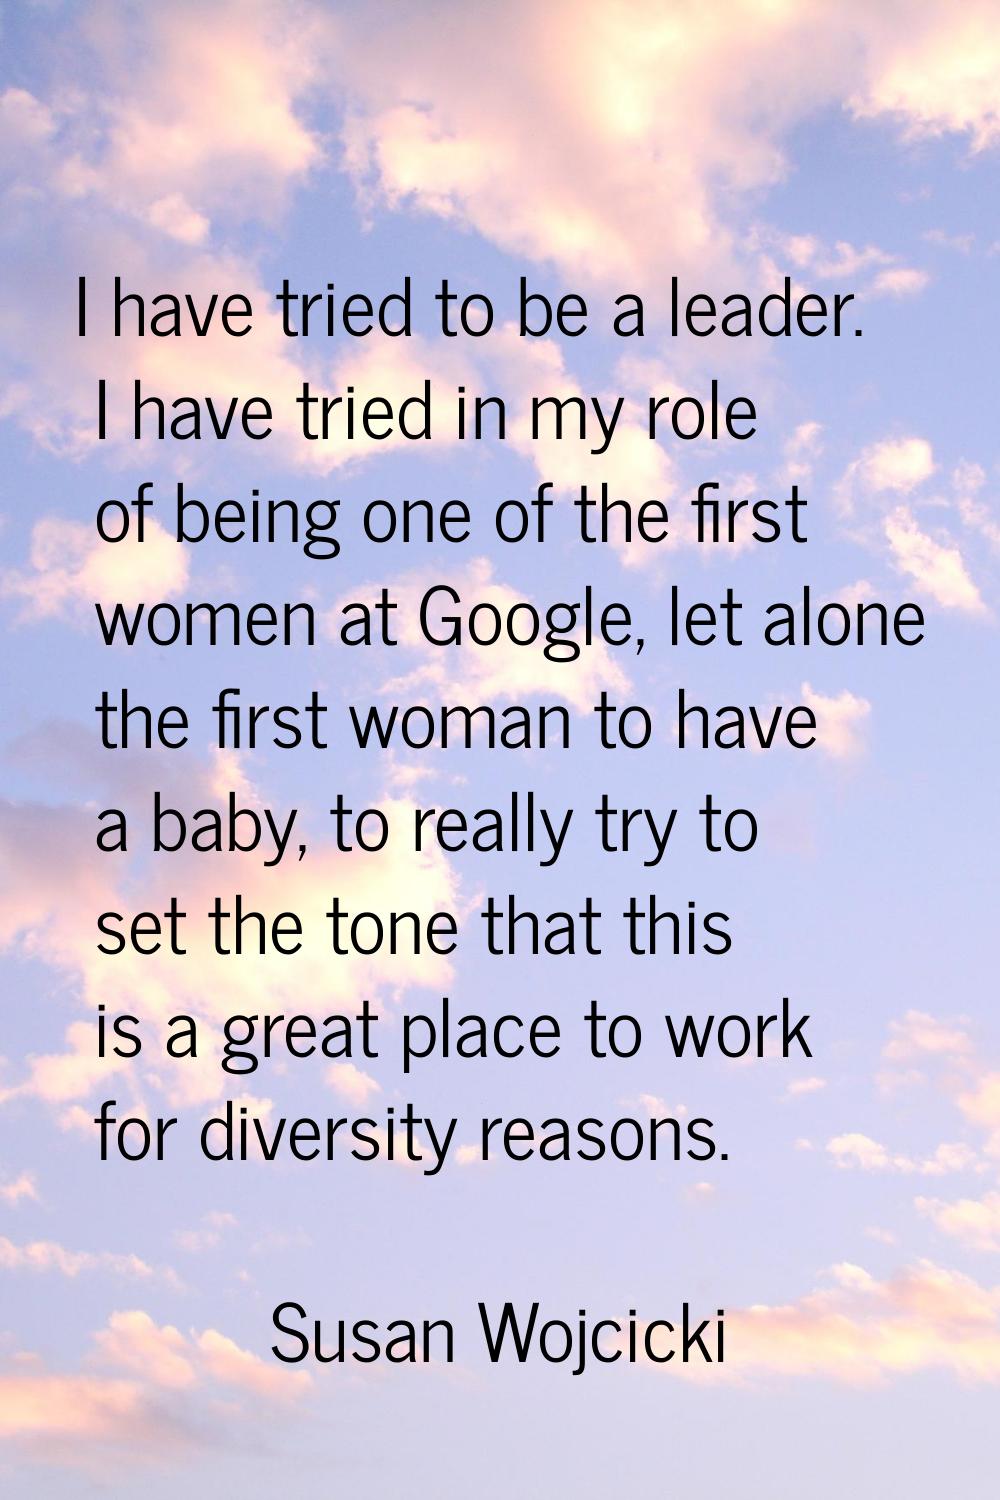 I have tried to be a leader. I have tried in my role of being one of the first women at Google, let